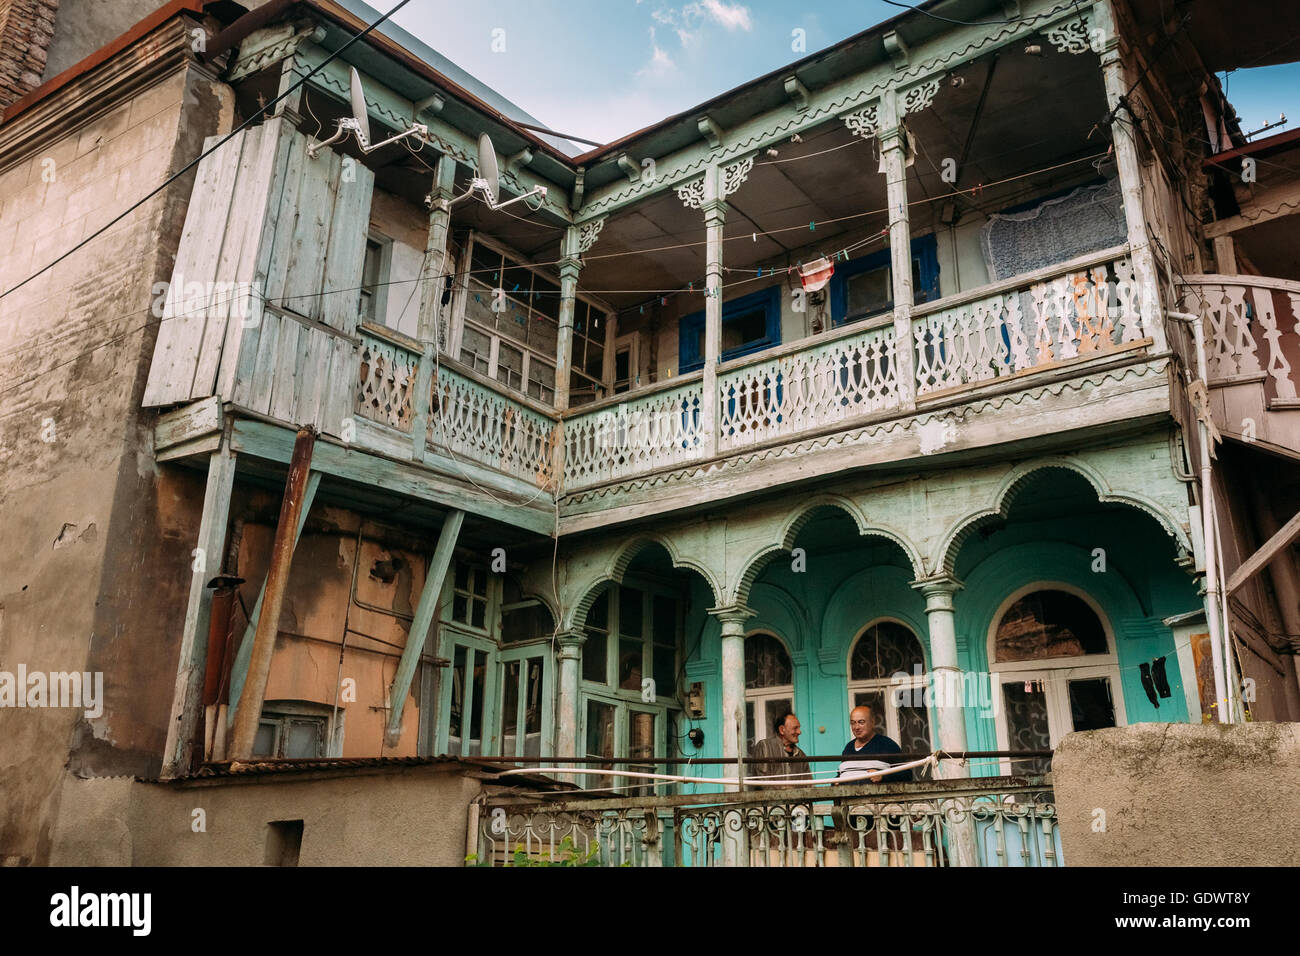 Tbilisi, Georgia - May 19, 2016: Two Men Talking While Standing On The Balcony Of An Old House In The Old Part Of Tbilisi - The Stock Photo